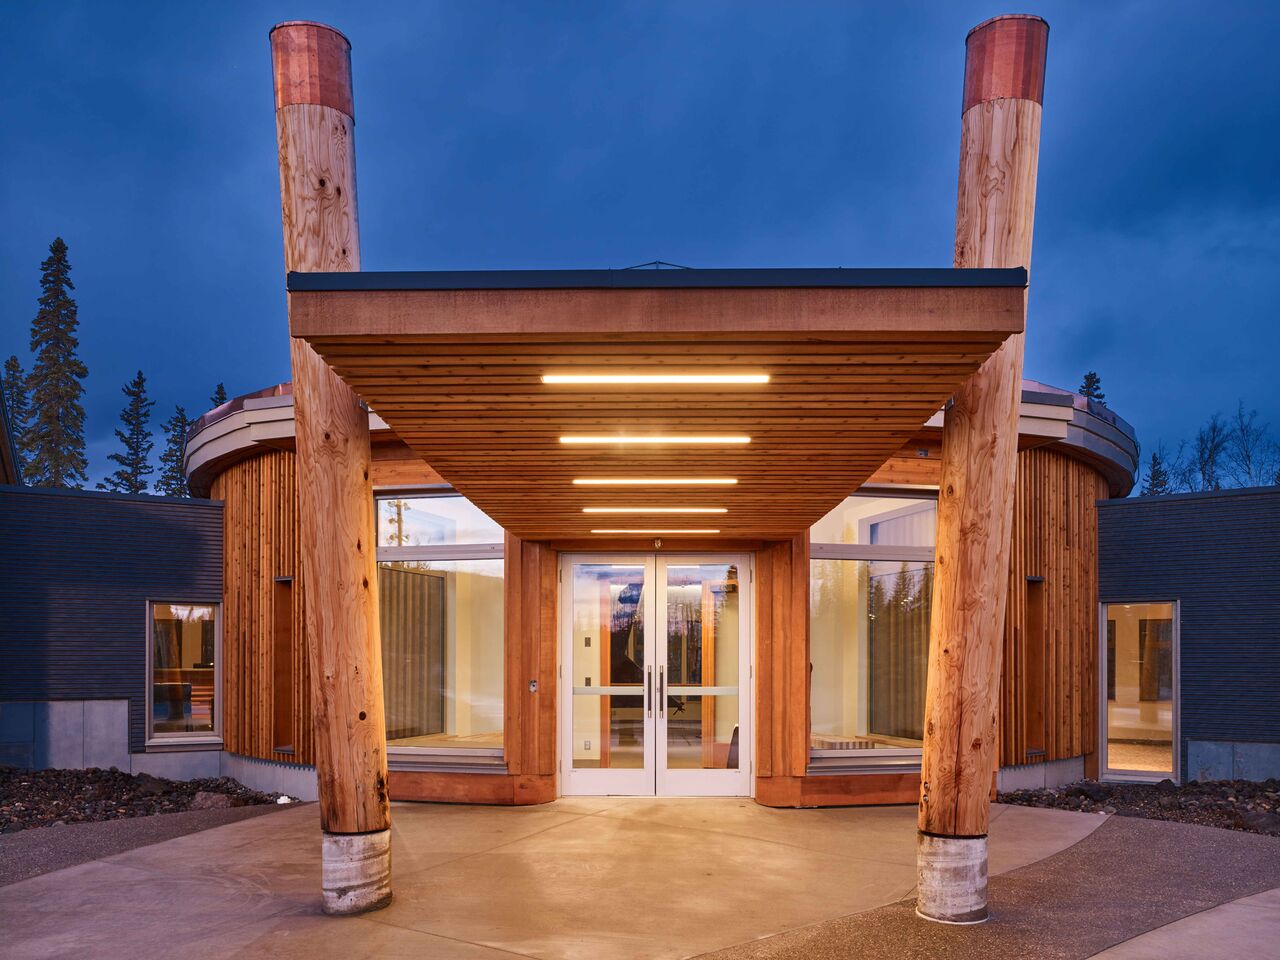 Nadleh Whut'enne Yah Administration and Cultural Building<abbr>Fort Fraser, B.C. Canada<br>Douglas fir dimension lumber framing, cedar tongue-and-groove planks</abbr>